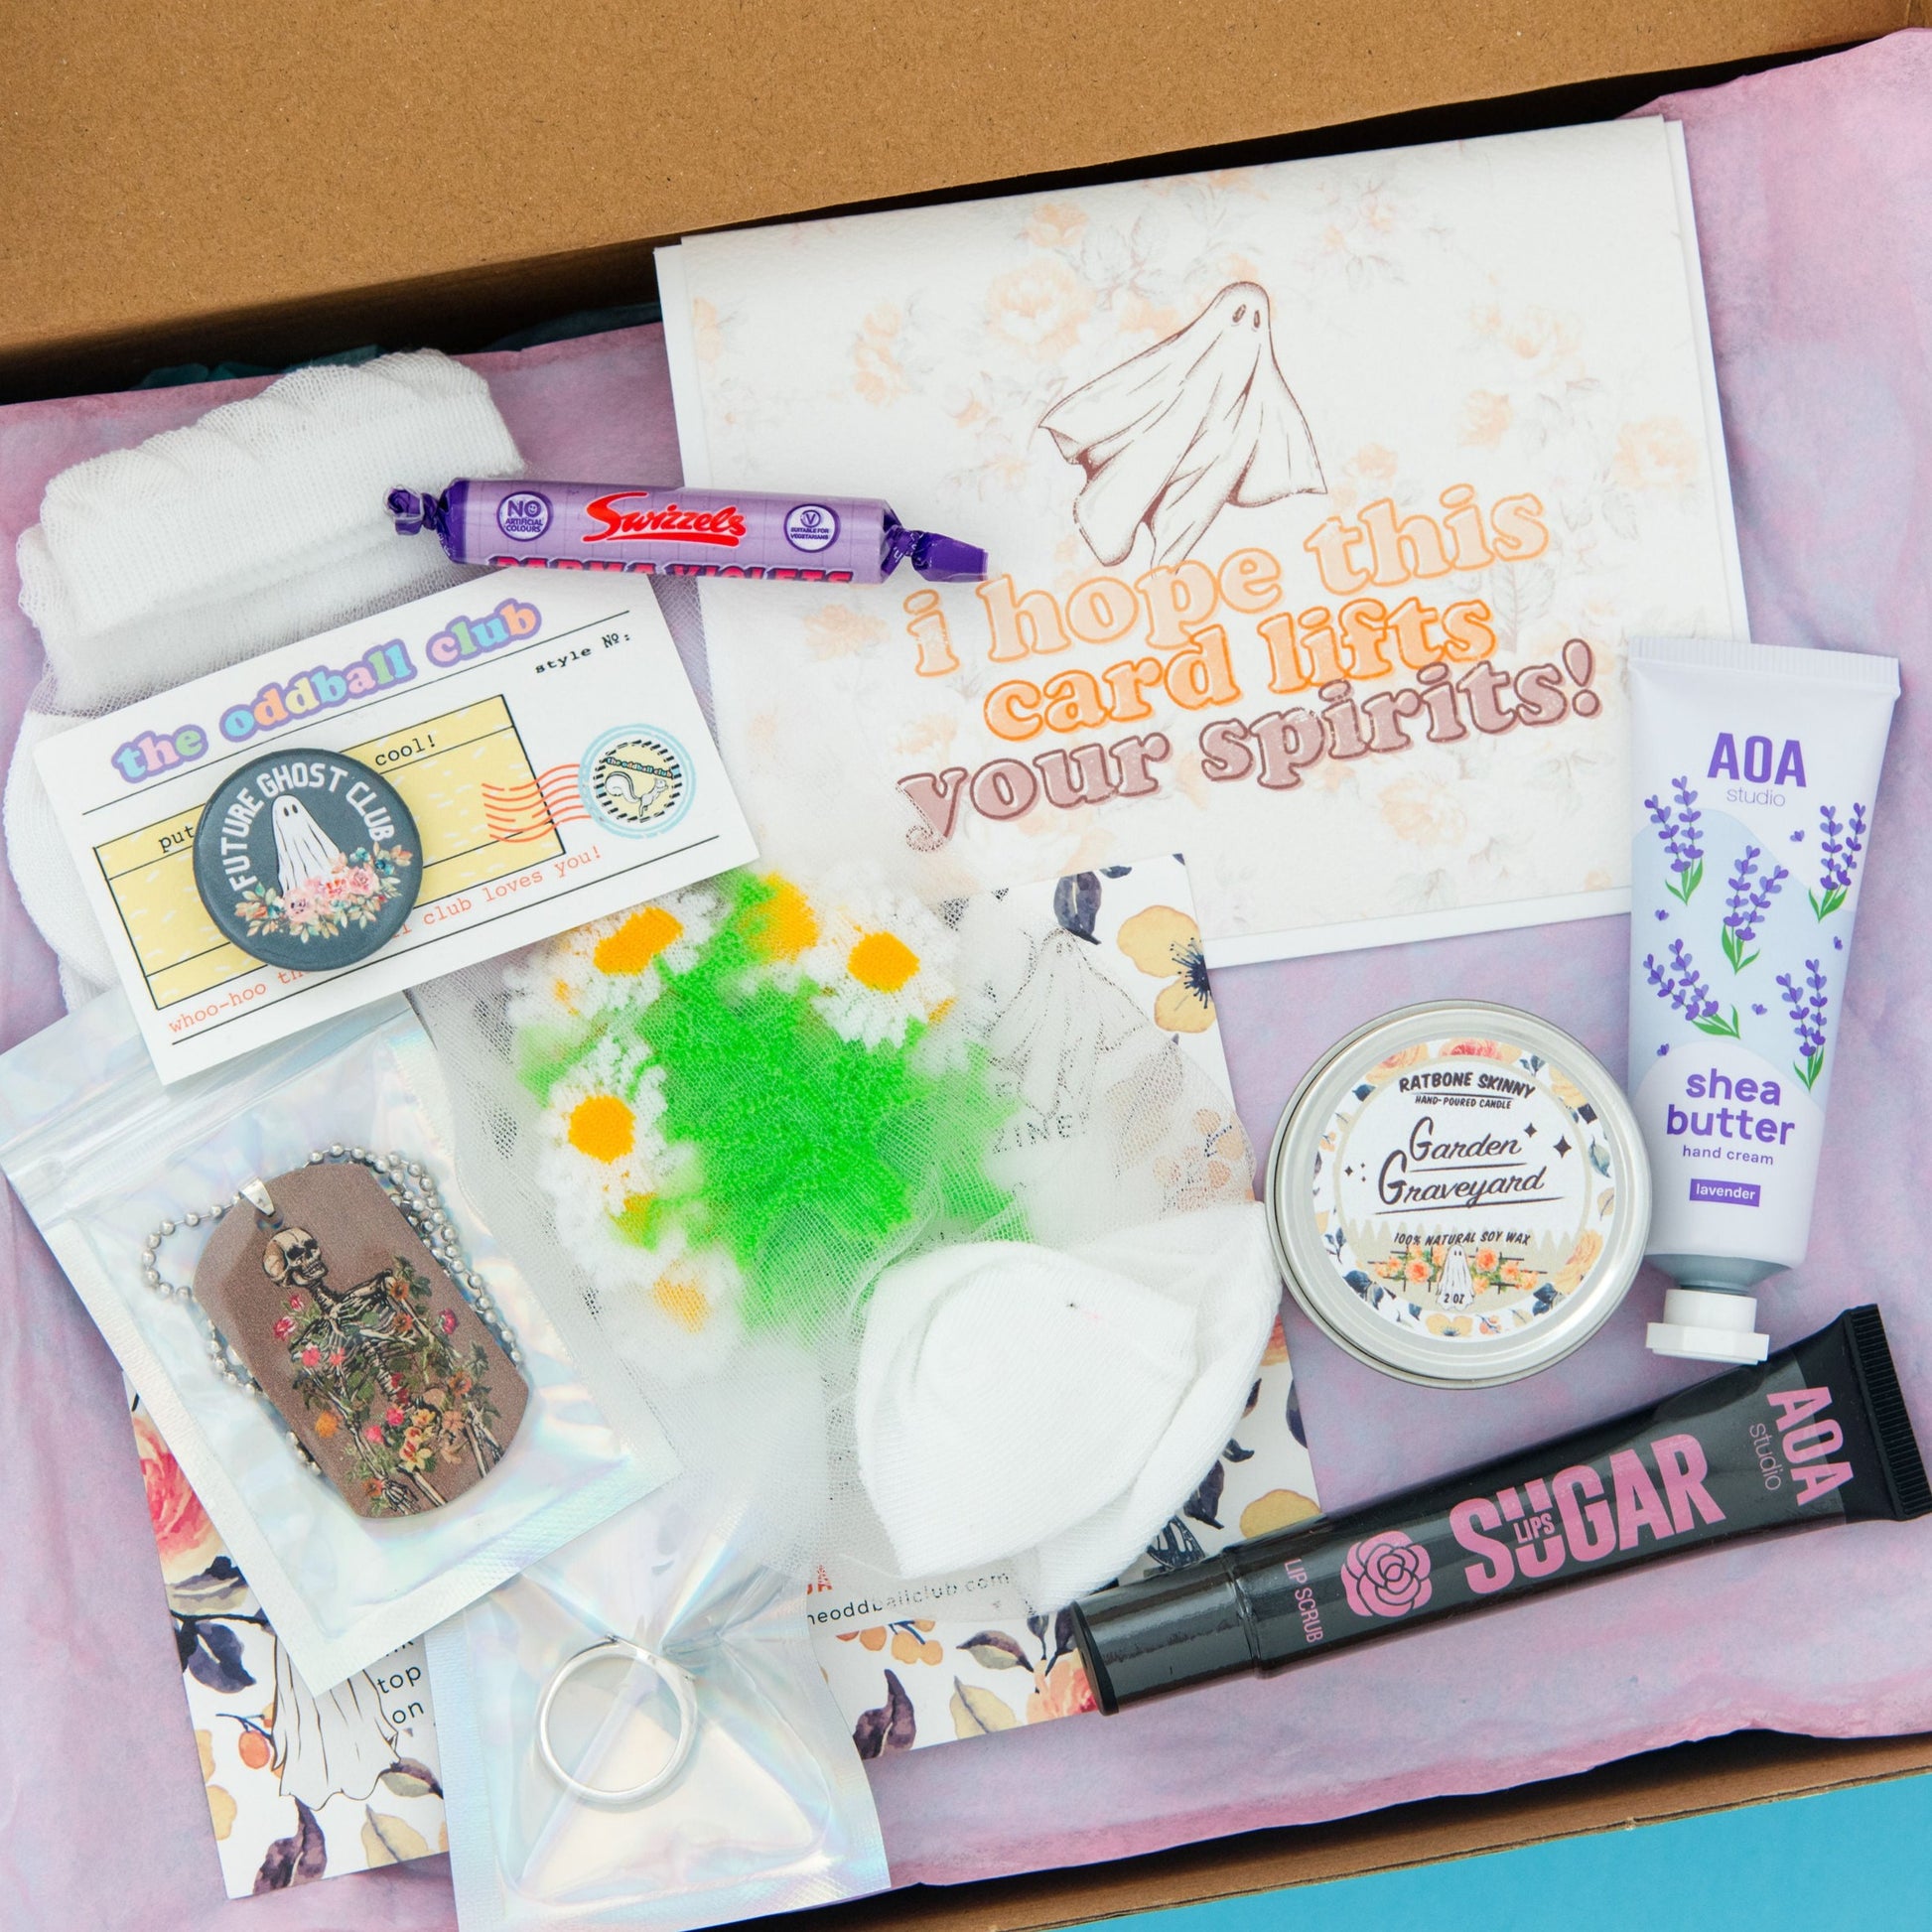 Ghost Greeting Card subscription box featuring a beautiful floral background. Includes a mini candle with a spooky scent, sheer daisy flower socks, luxurious hand lotion, and a spooky ghost greeting card. Perfectly blending elegance and eeriness. Order now to get into the spooky spirit!